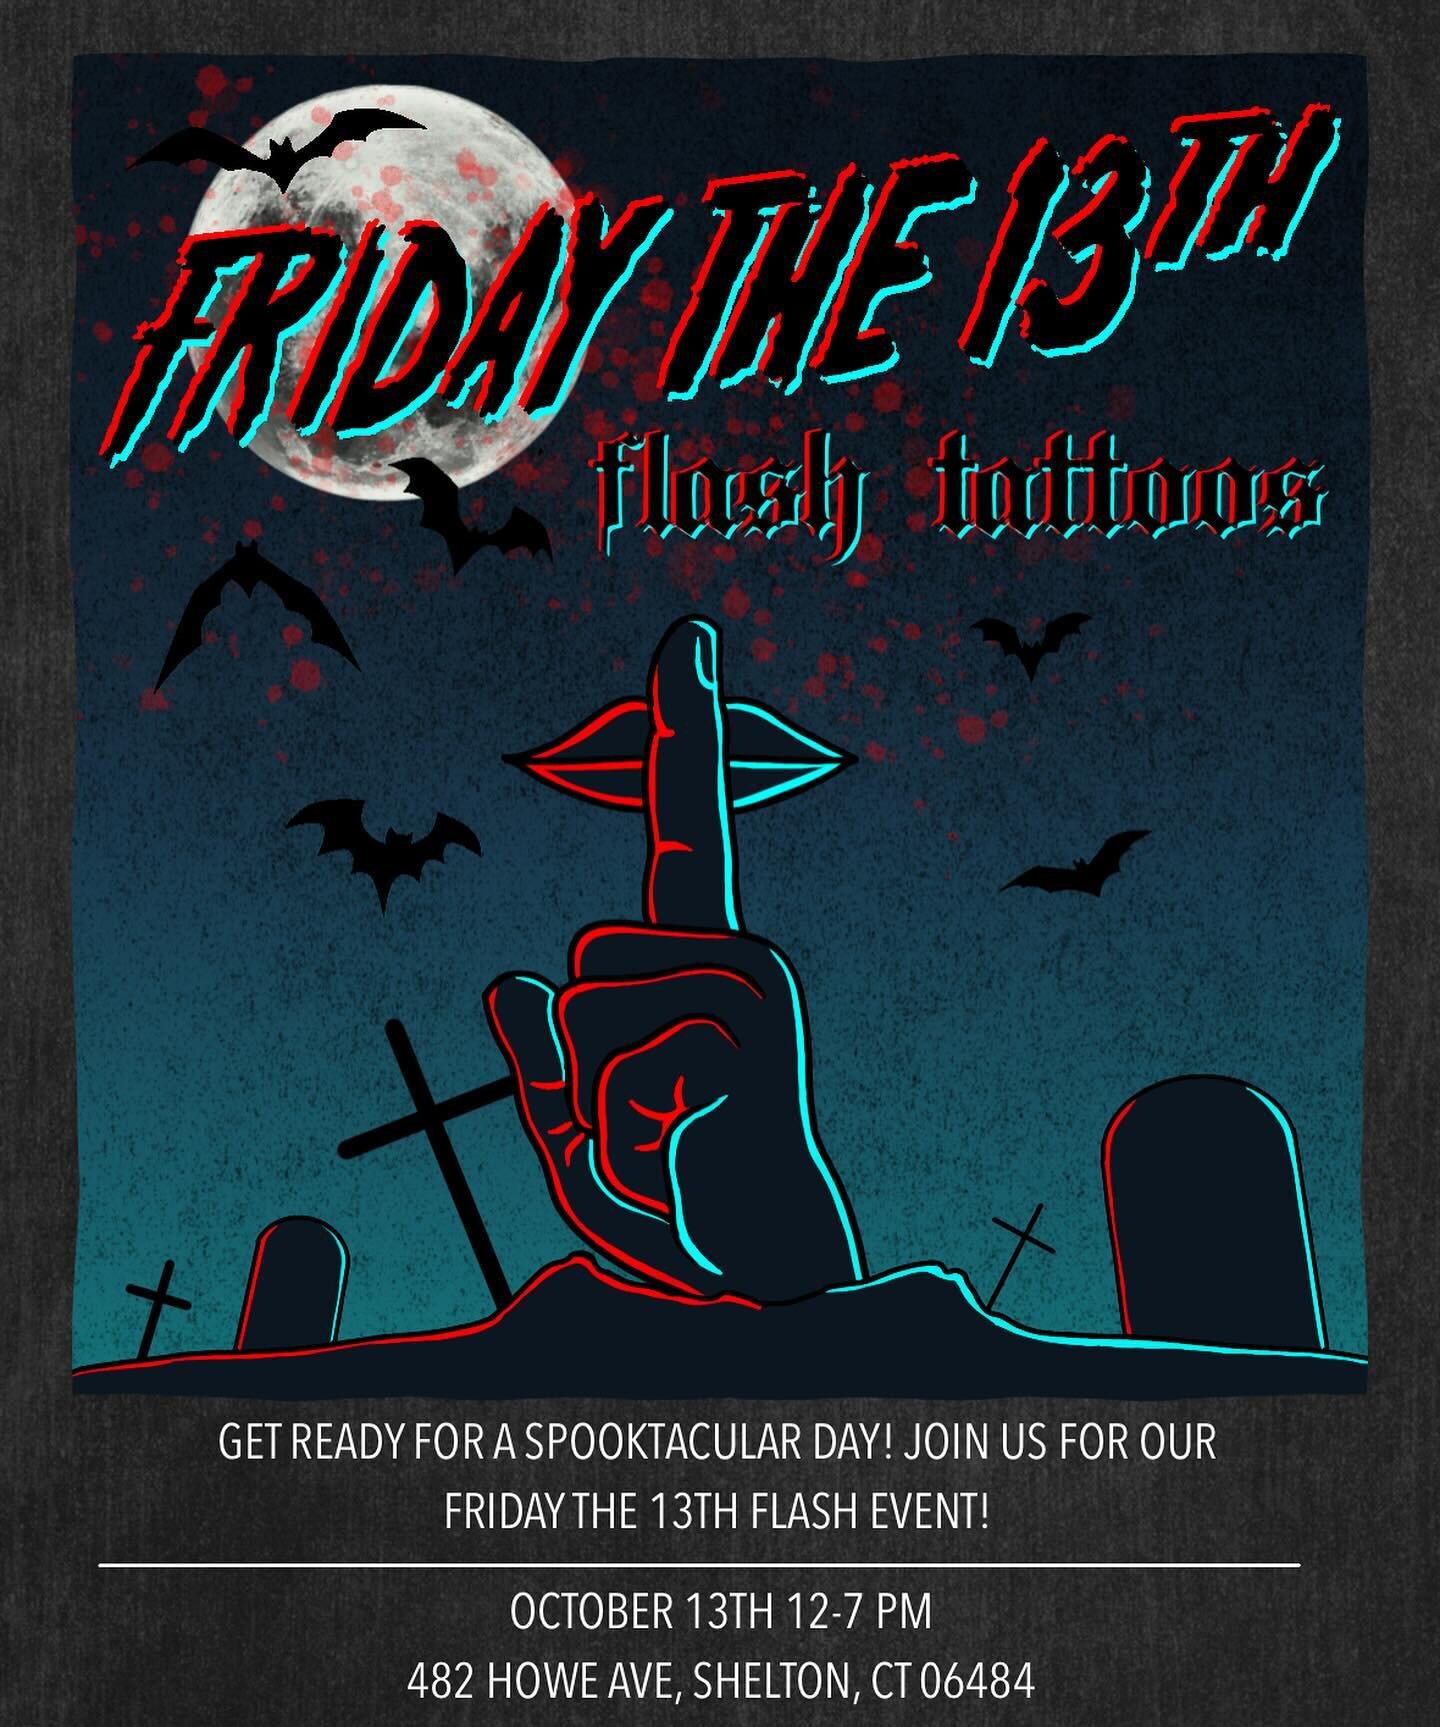 TIME TO GET SPOOKY 🔪

➡️SWIPE FOR DETAILS

We&rsquo;re offering a ton of flash designs for Friday the 13th! 🩸 

We&rsquo;re also giving away a bunch of custom made goodies! 😉

This is just the beginning of our October events. Every single Friday i